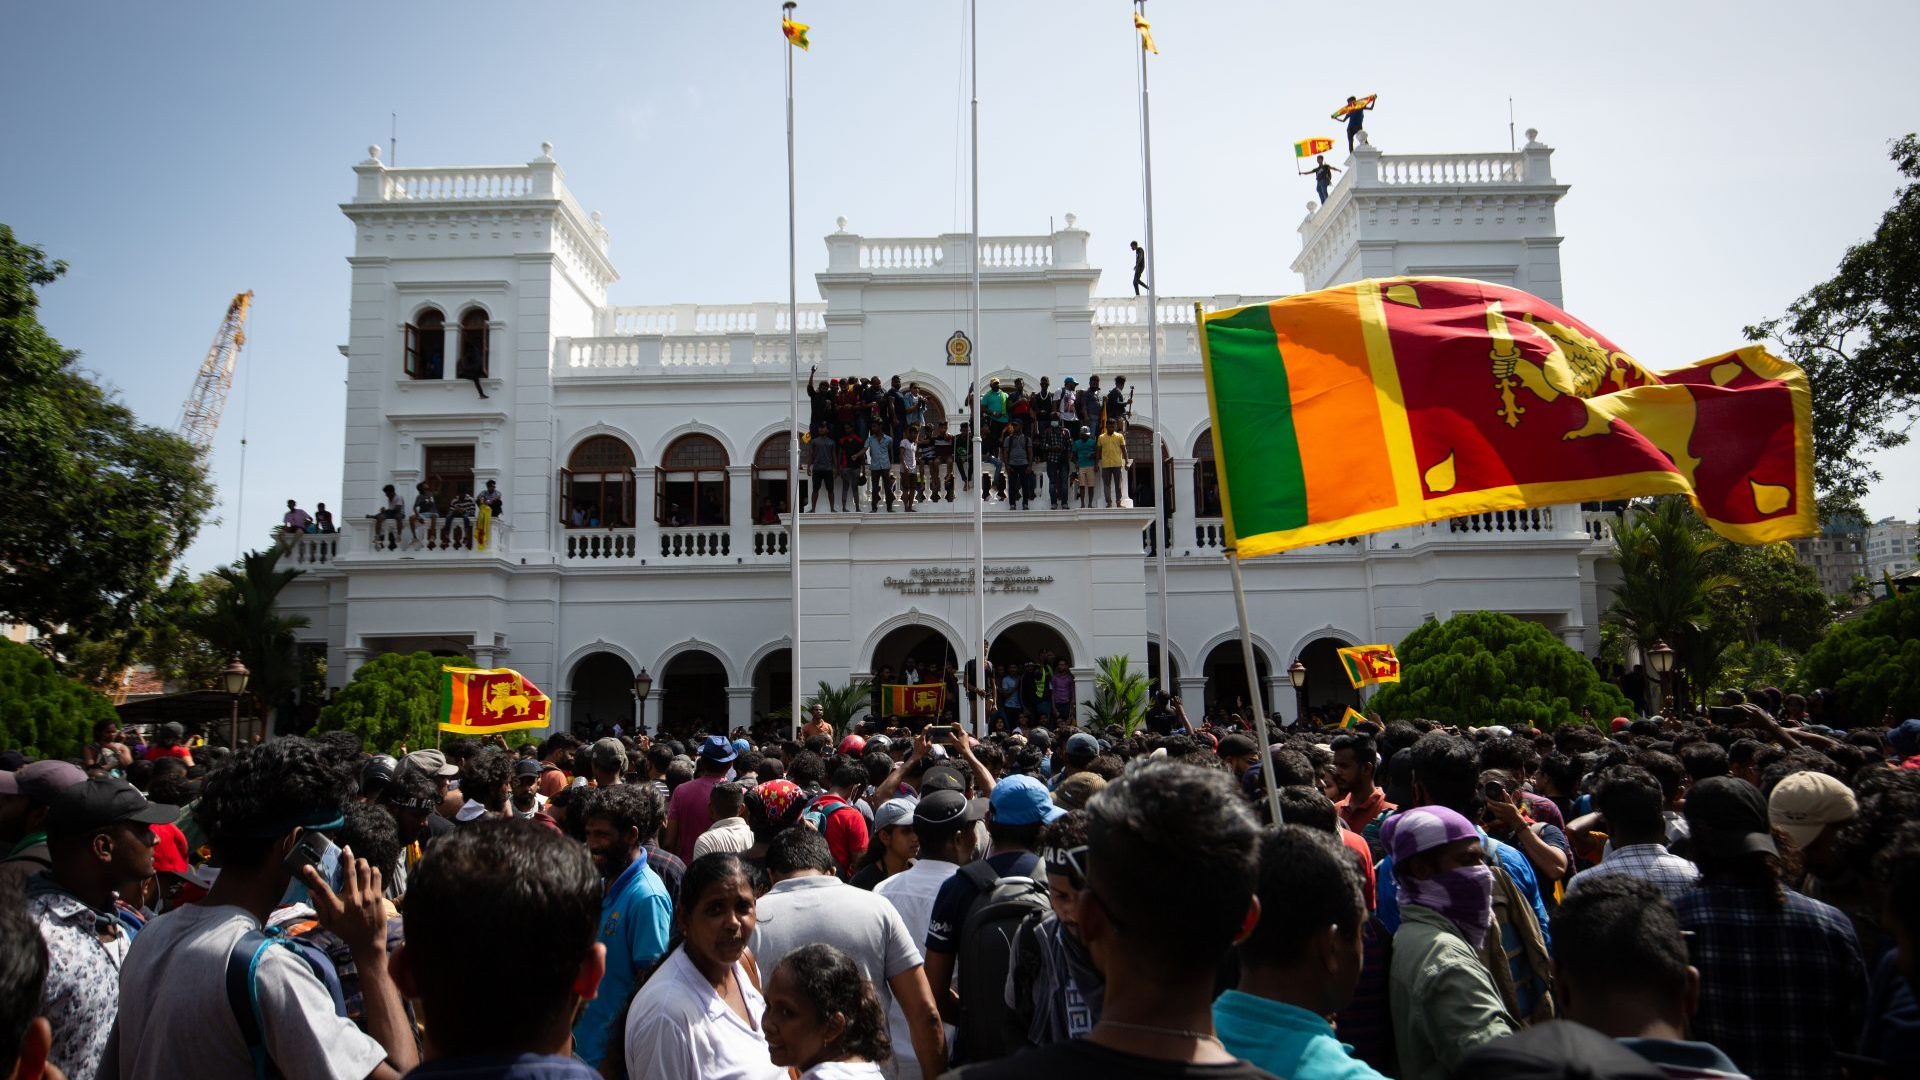 Protests have taken place in Sri Lanka against the economic crisis . Photo: Abhishek Chinnappa/Getty